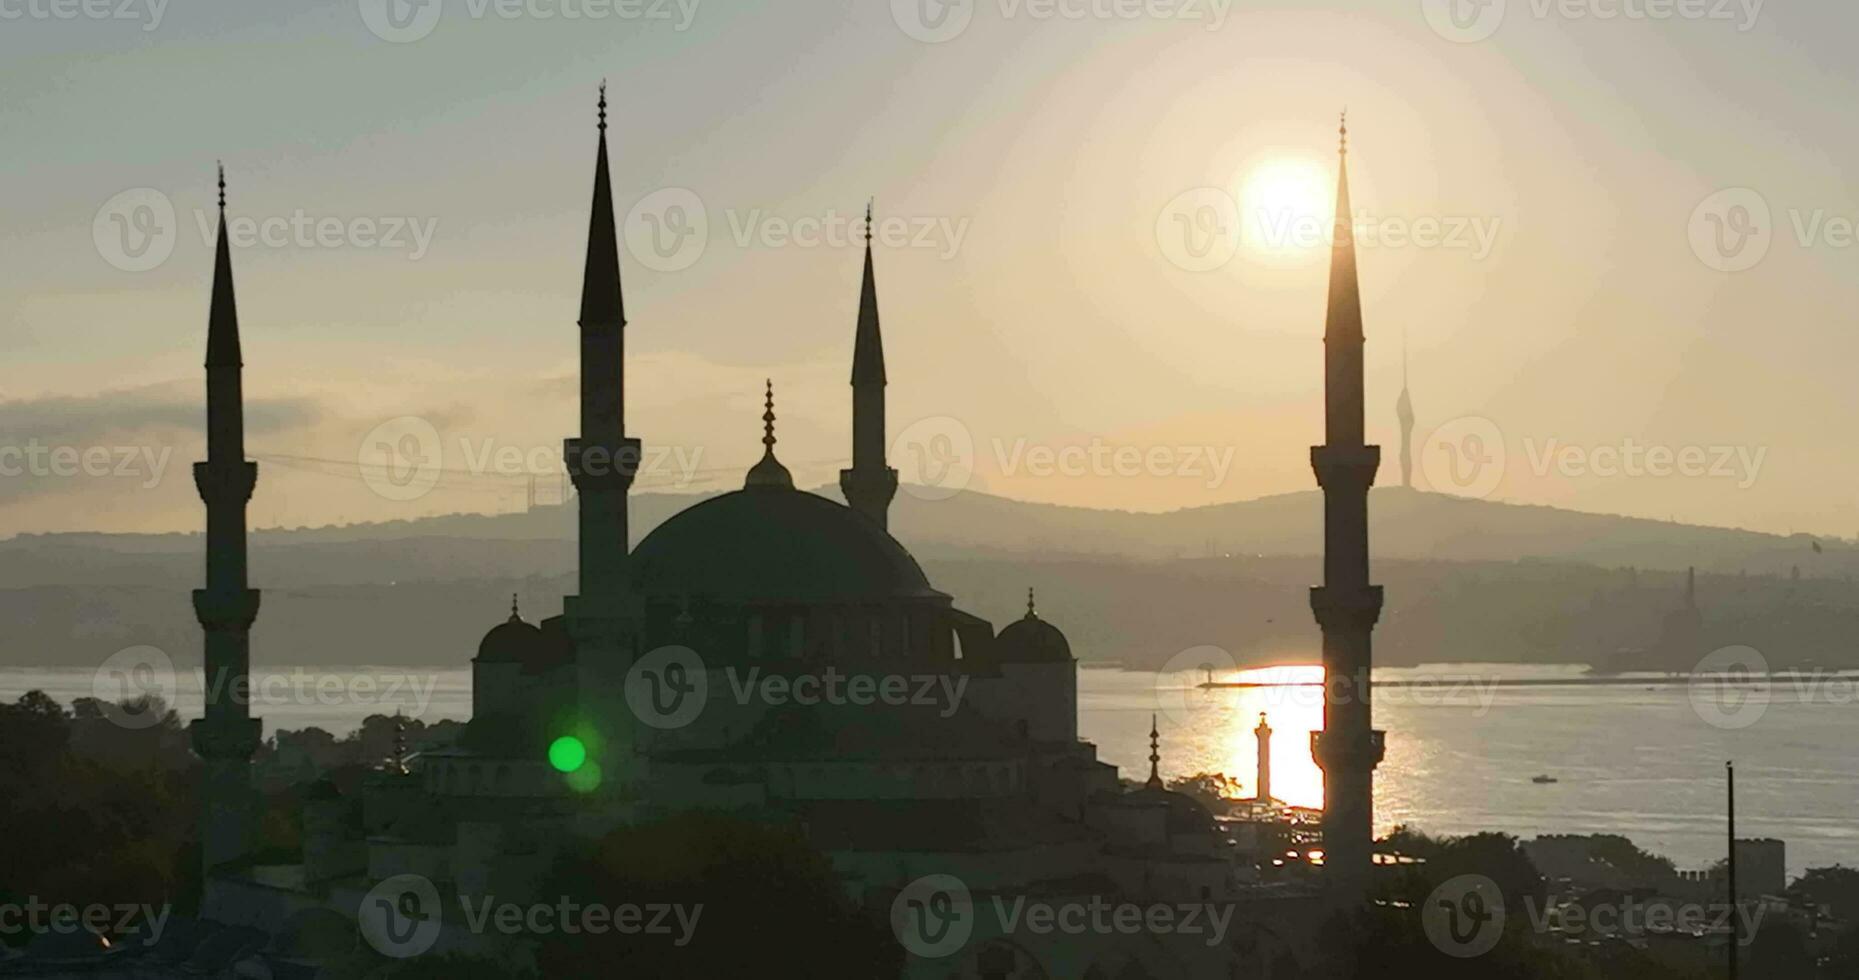 Istanbul, Turkey. Sultanahmet area with the Blue Mosque and the Hagia Sophia with a Golden Horn and Bosphorus bridge in the background at sunrise. photo